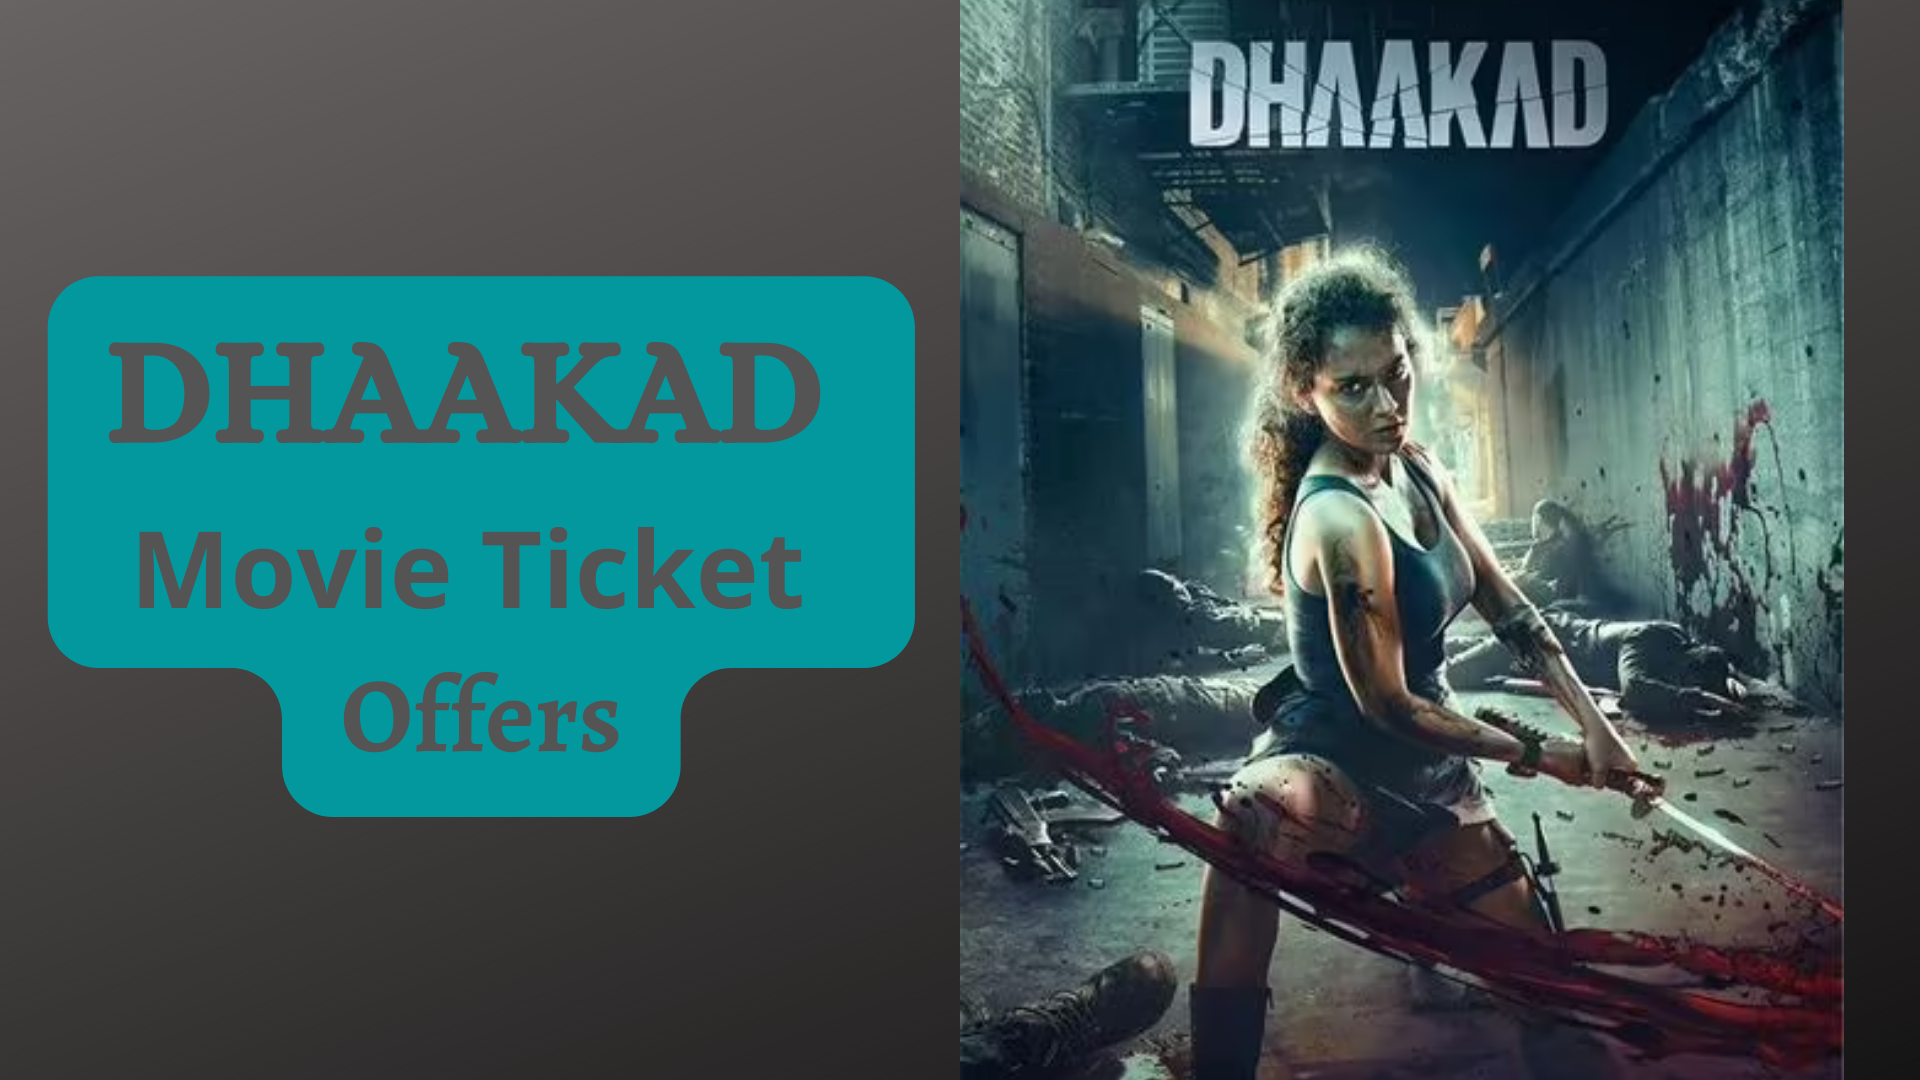 Dhaakad Movie Ticket Offers - Get Rs.200 Off With BookMyShow Vouchers & More